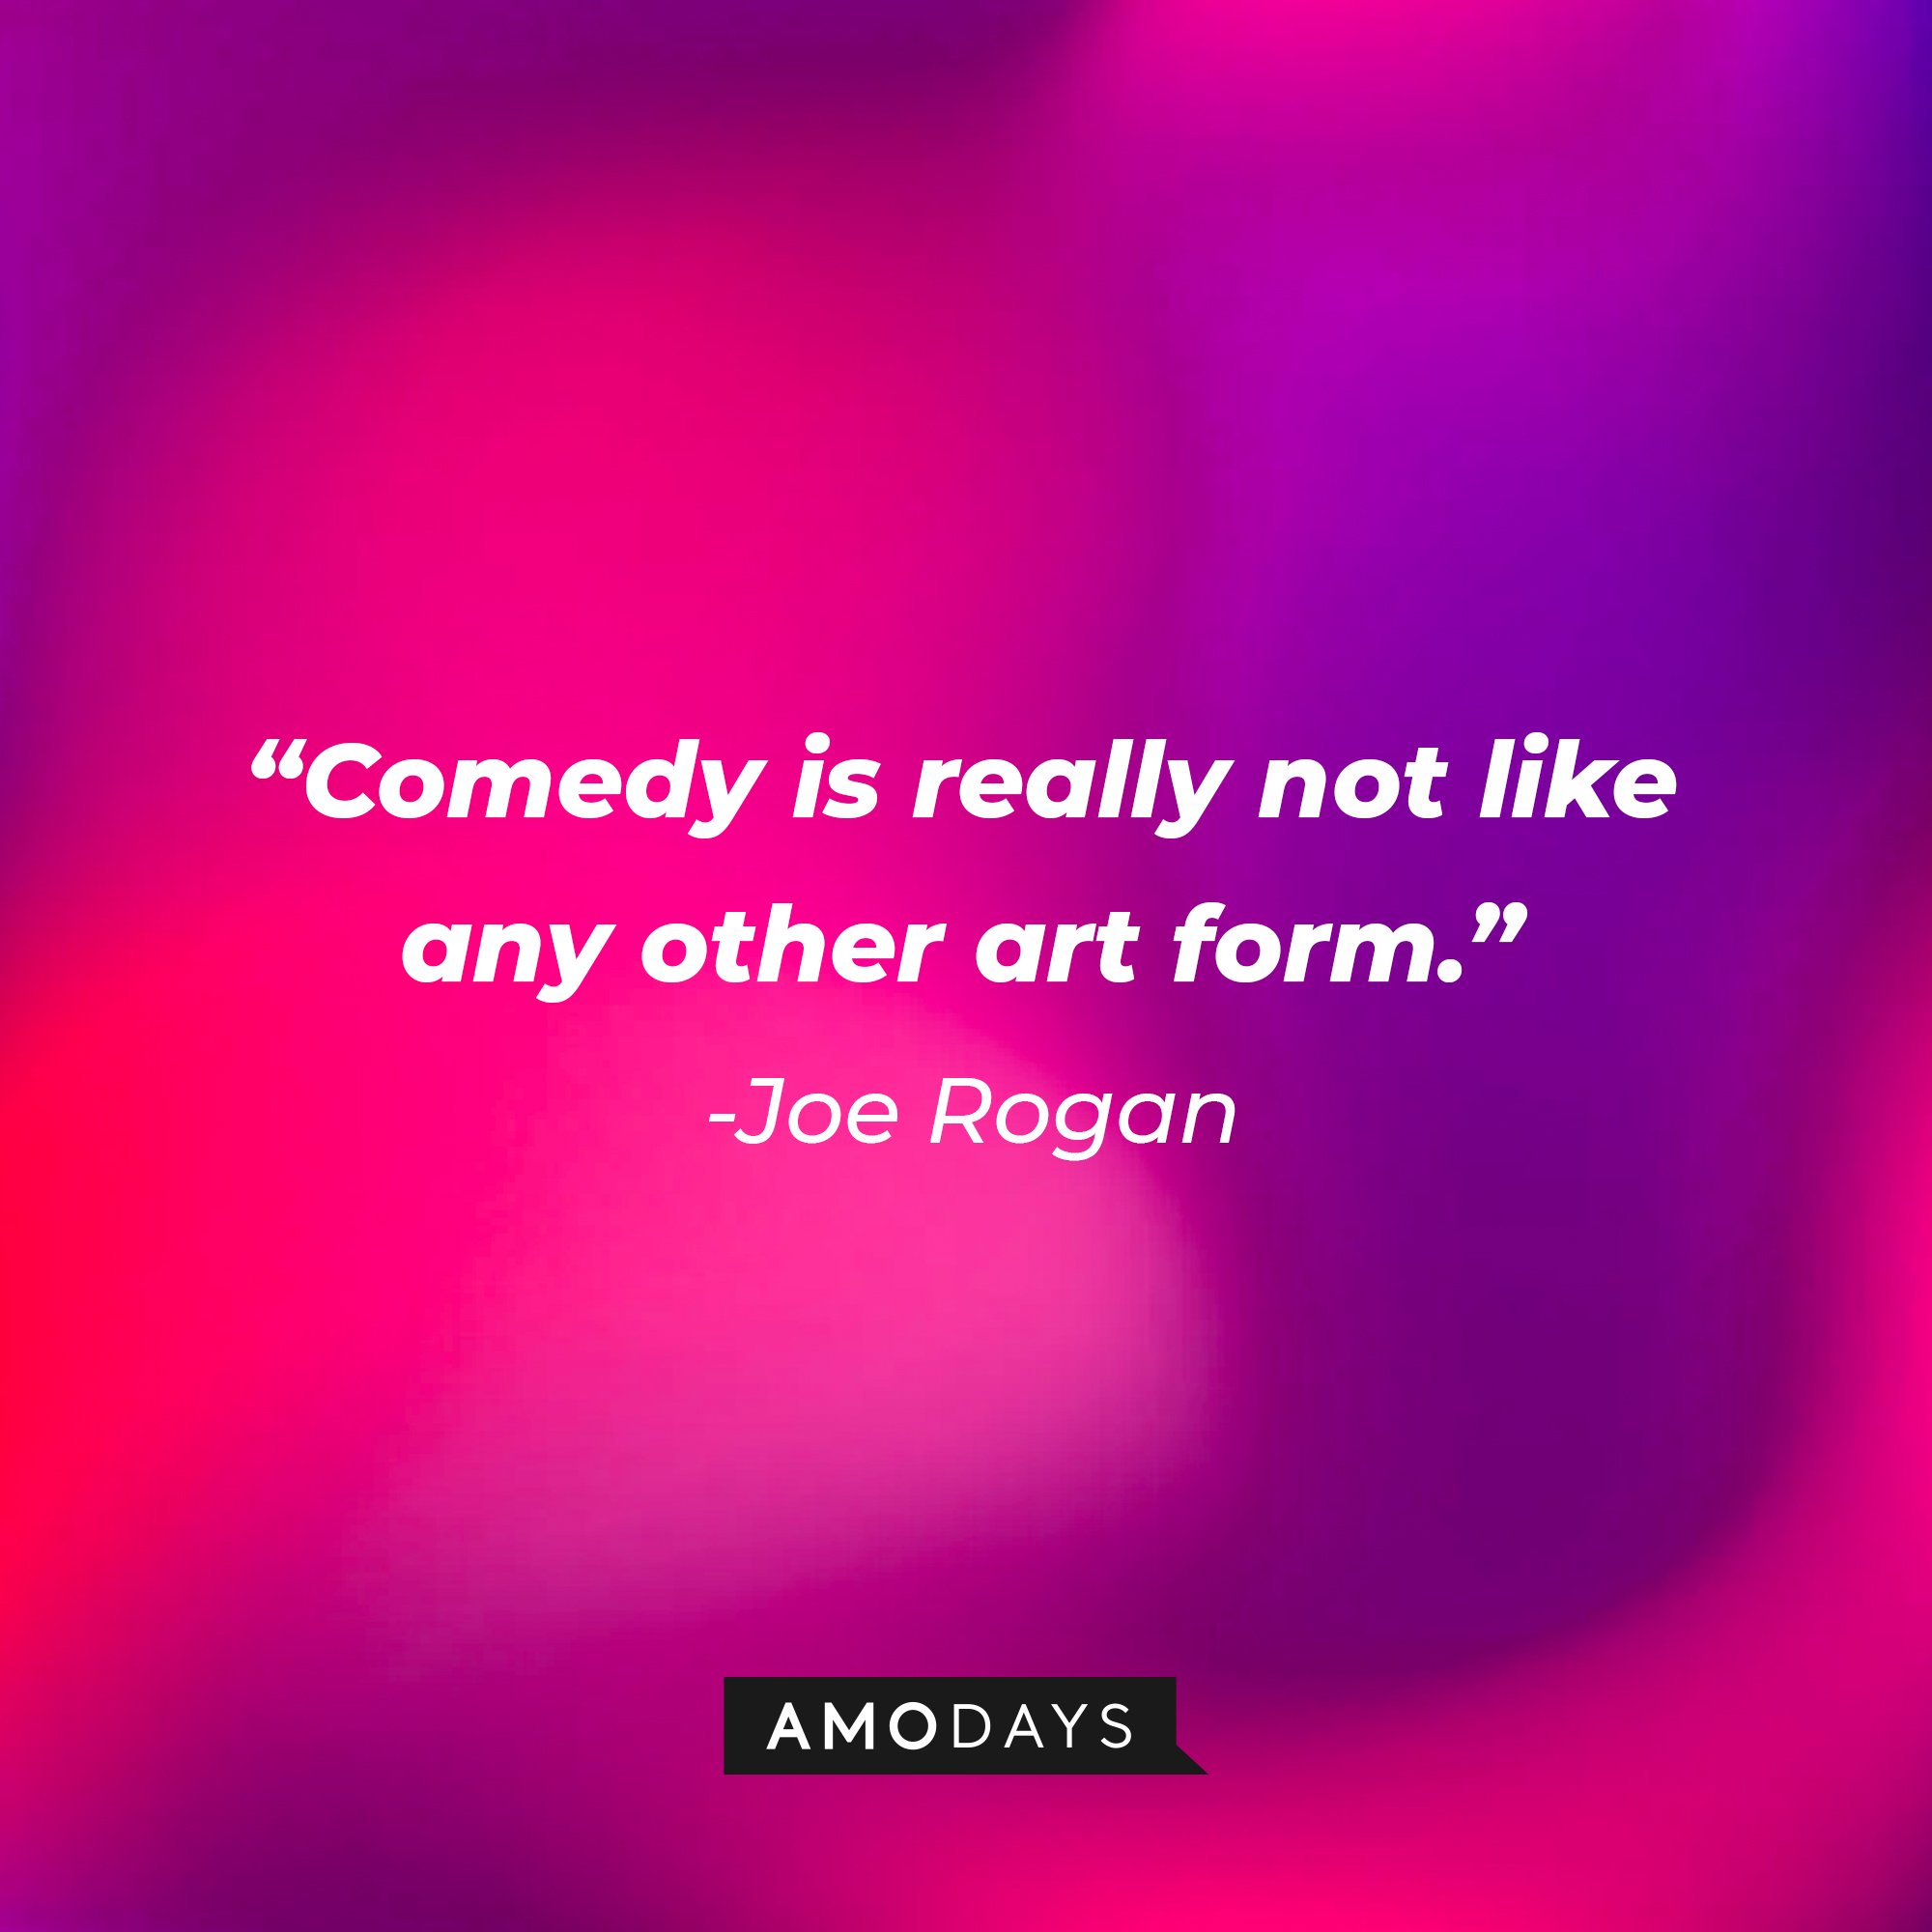 Joe Rogan's quote: "Comedy is really not like any other art form." | Image: AmoDays